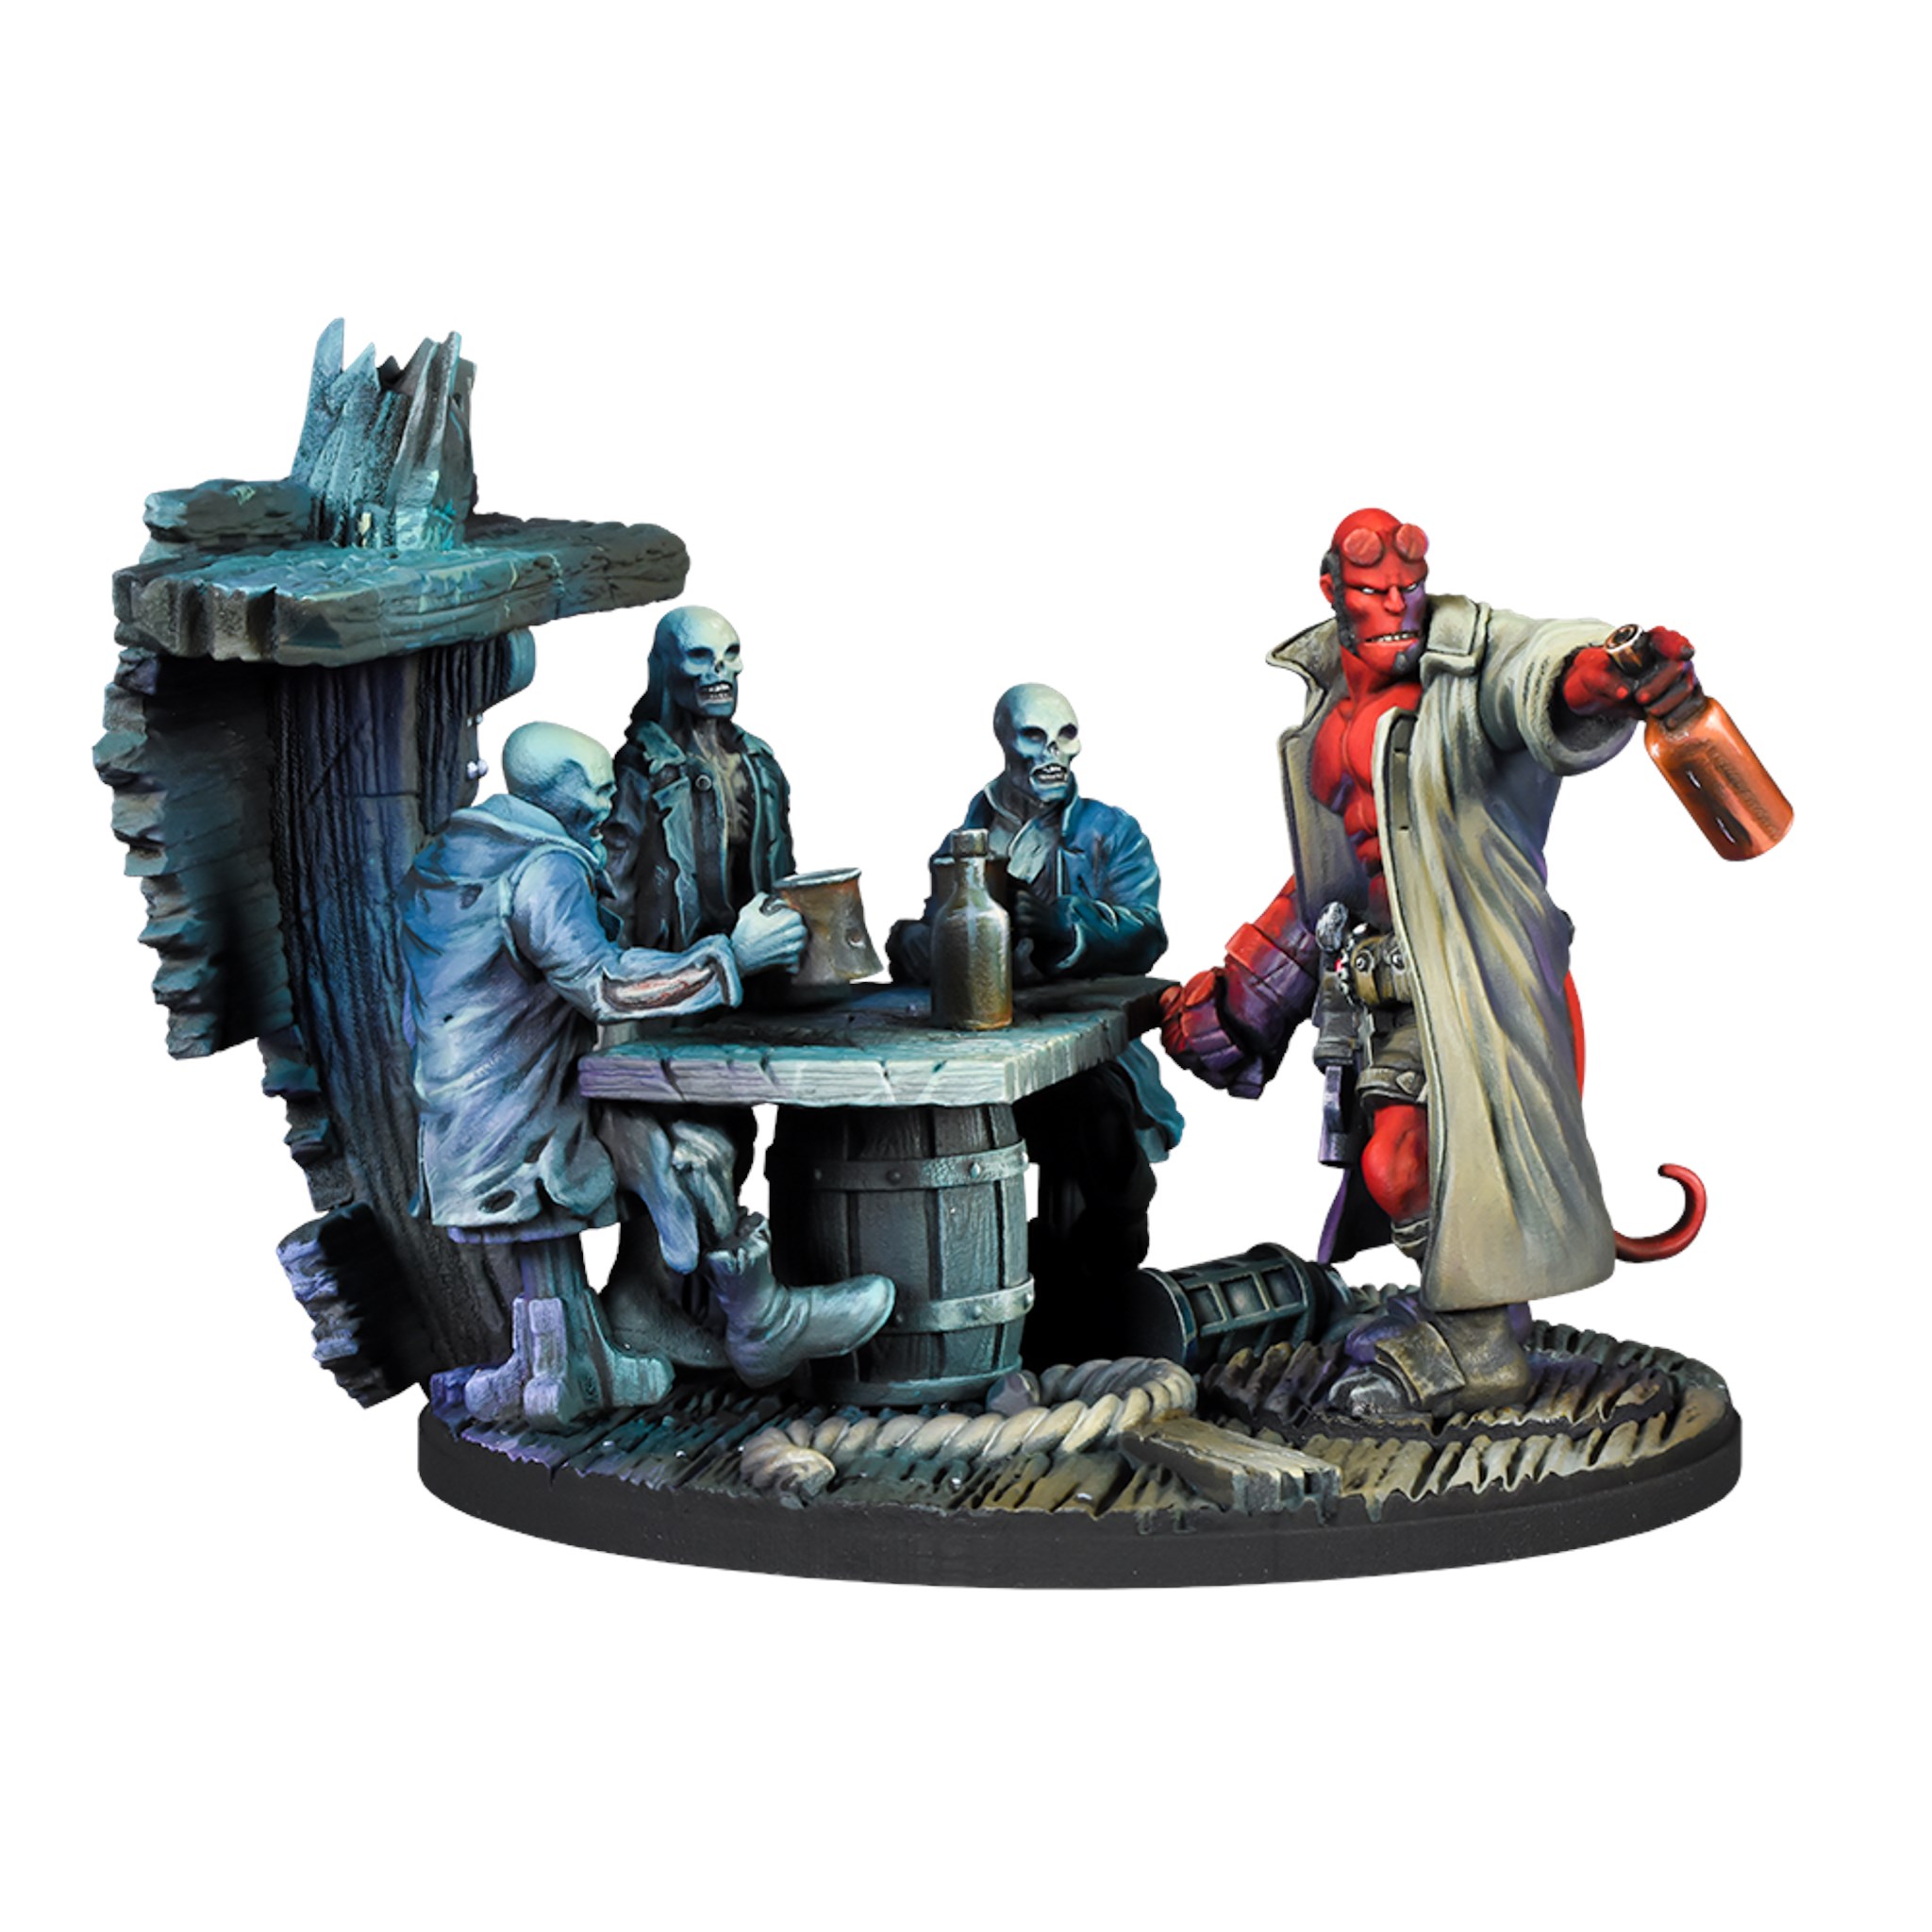 HELLBOY The Board Game Mantic Games 